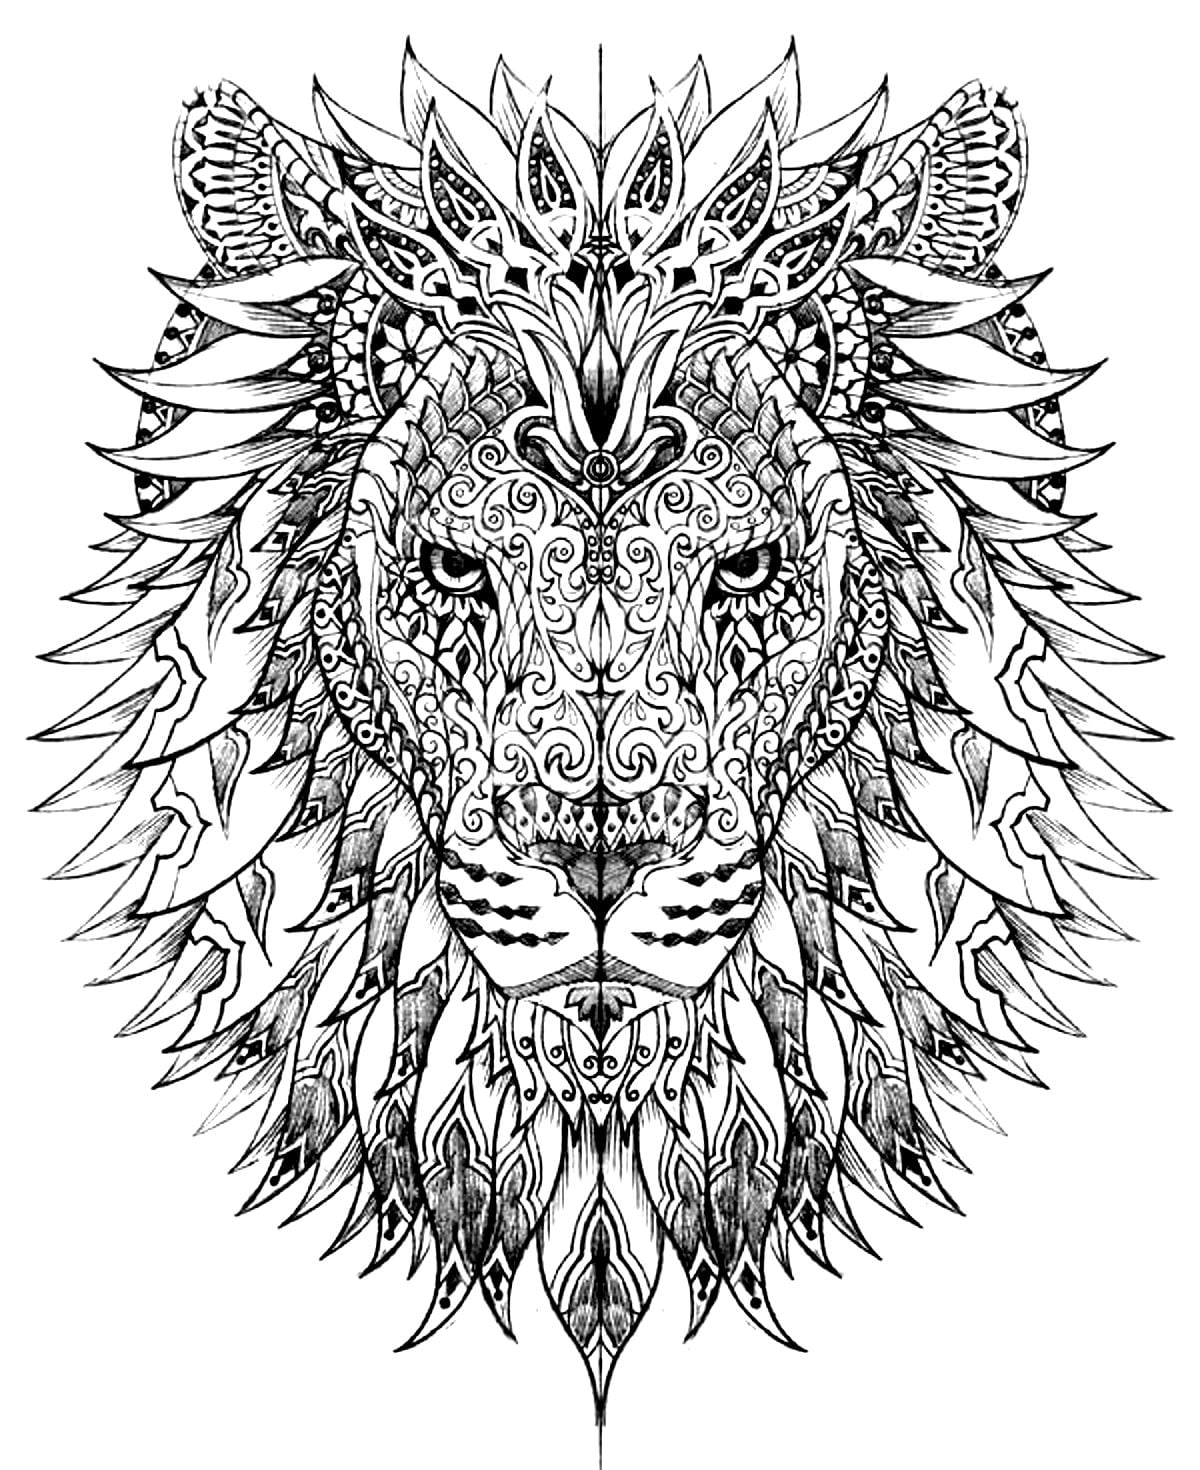 Adult Coloring Page: Lion Head | Adult Coloring Pages Will Help You De-Stress | POPSUGAR Smart Living Photo 2